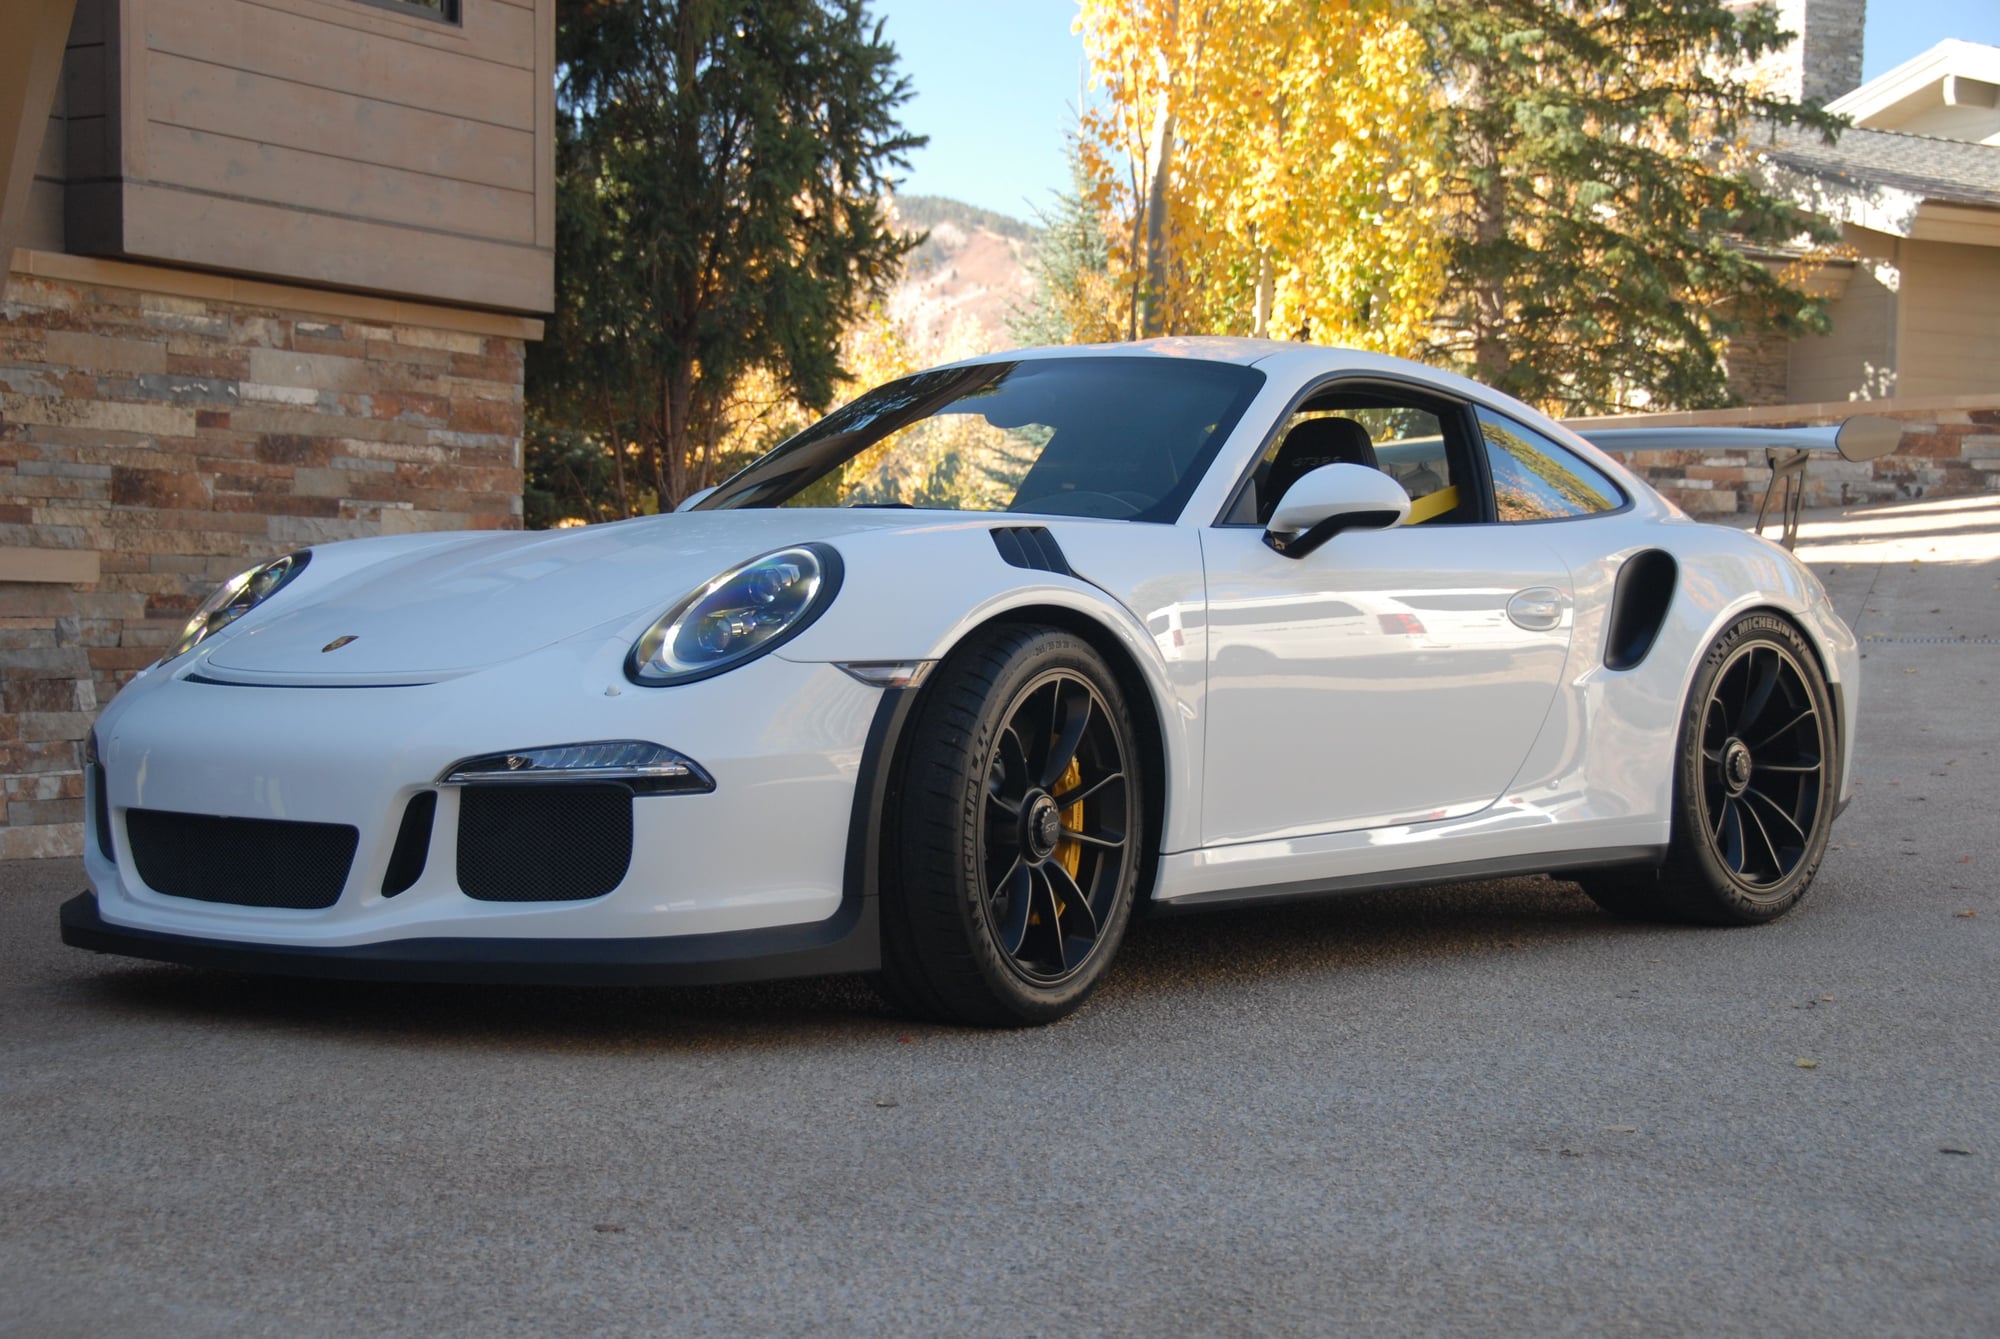 2016 Porsche GT3 - DELIVERY MILE 2016 PORSCHE GT3RS - Used - VIN WPOAF2A9XGS193171 - 32 Miles - 6 cyl - 2WD - Automatic - Coupe - White - Salt Lake City, UT 84115, United States